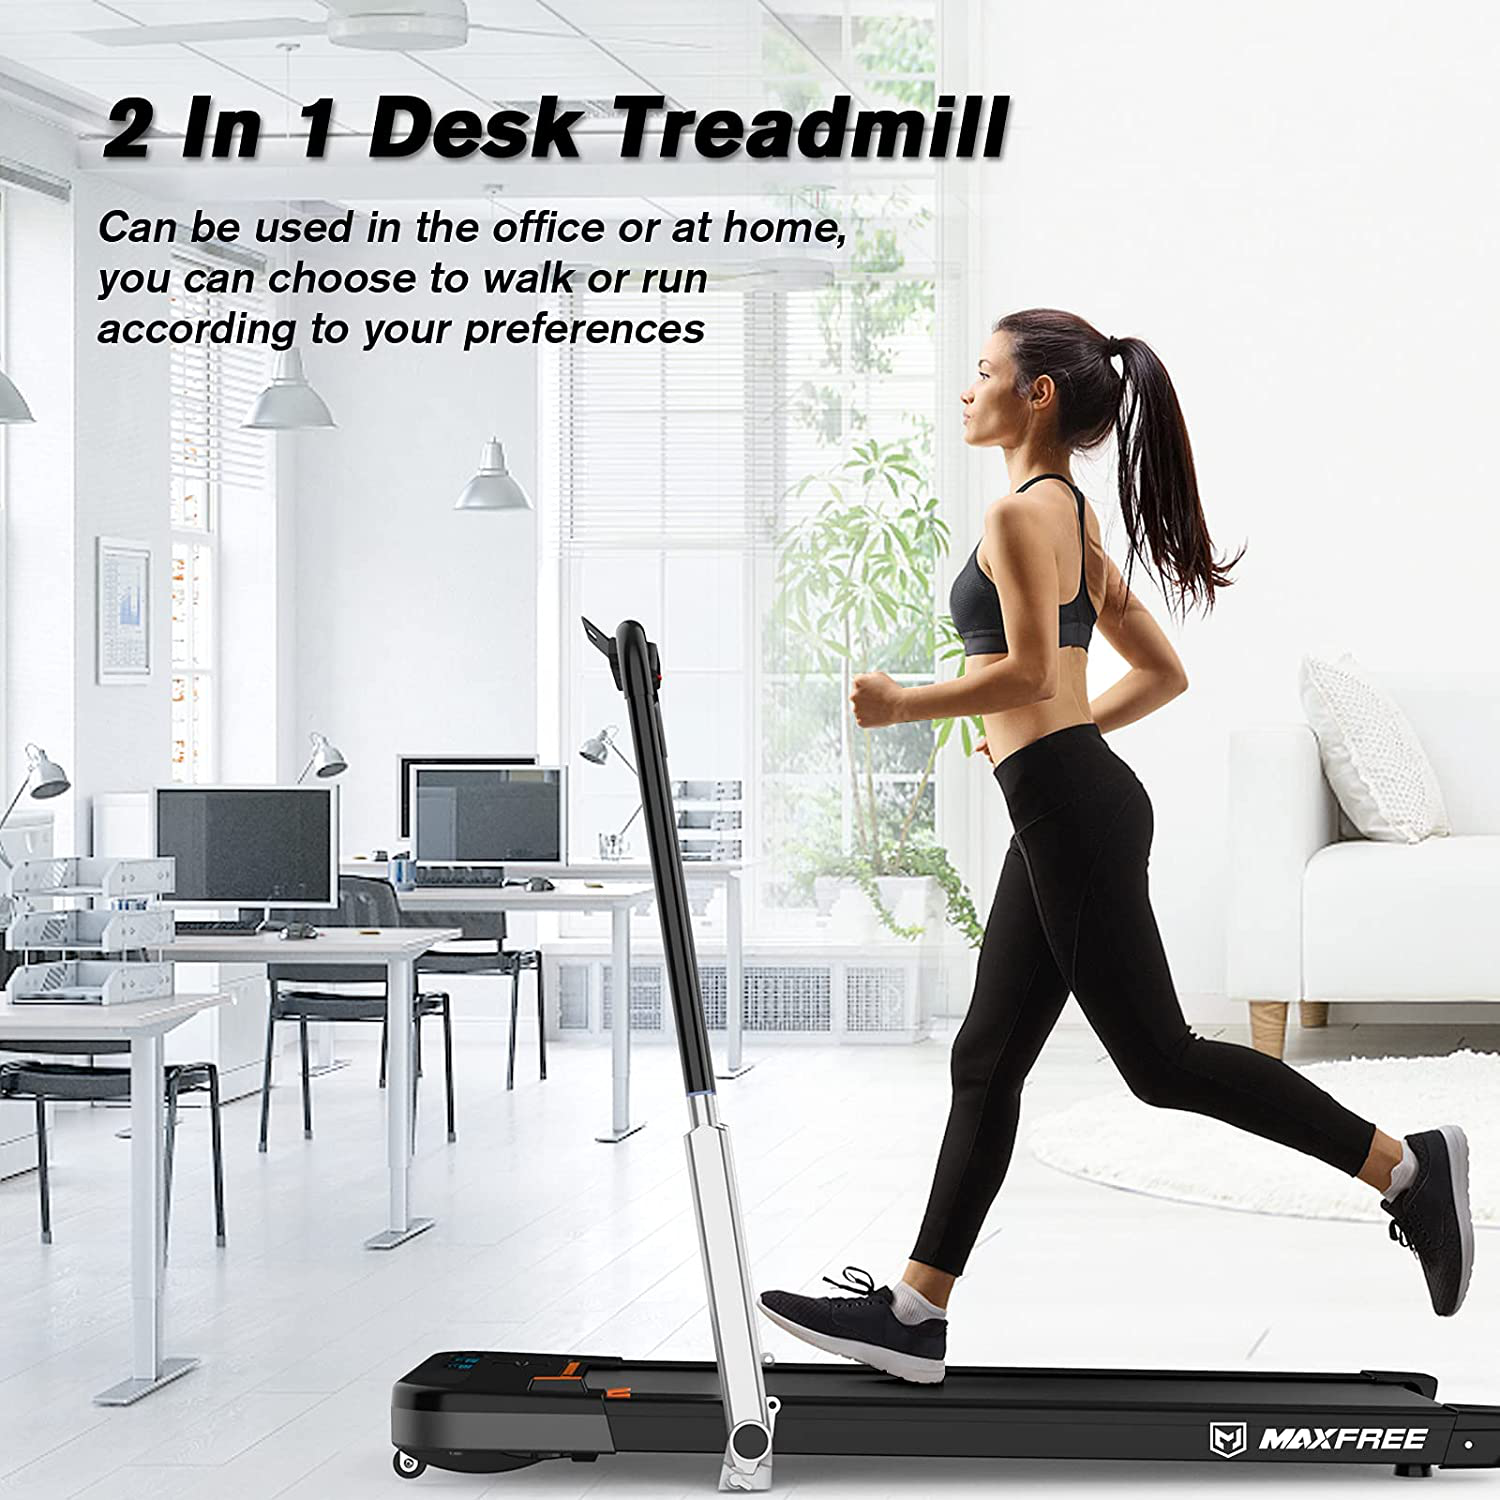 Walking Pad, Under Desk Treadmill 2 in 1 for Home/Office with Remote  Control, Walking Treadmill, Portable Treadmill in LED Display